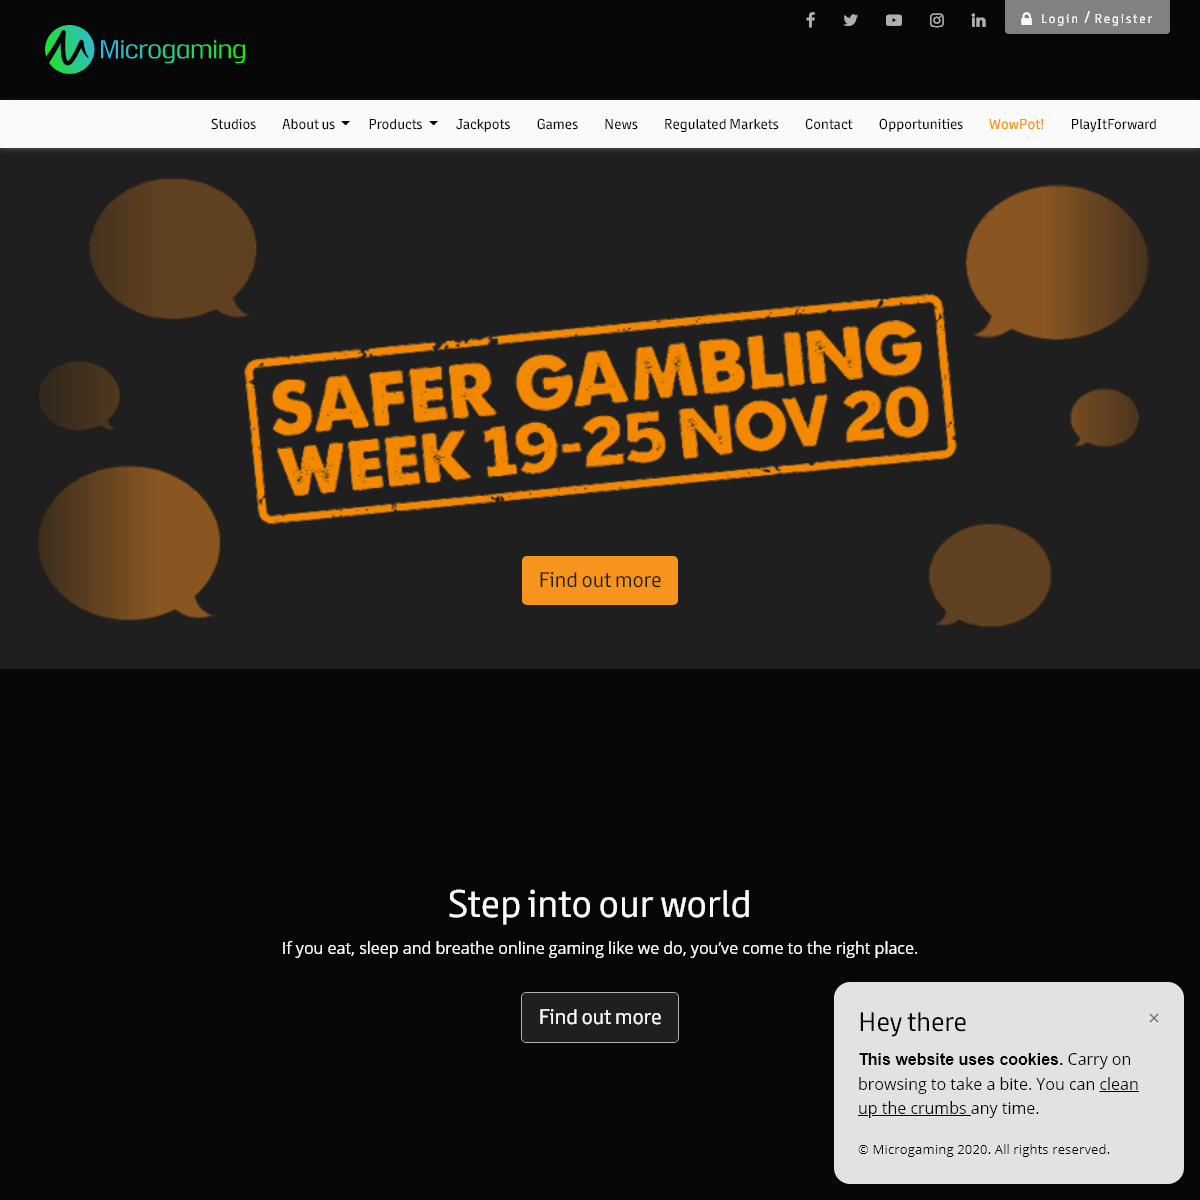 A complete backup of microgaming.co.uk